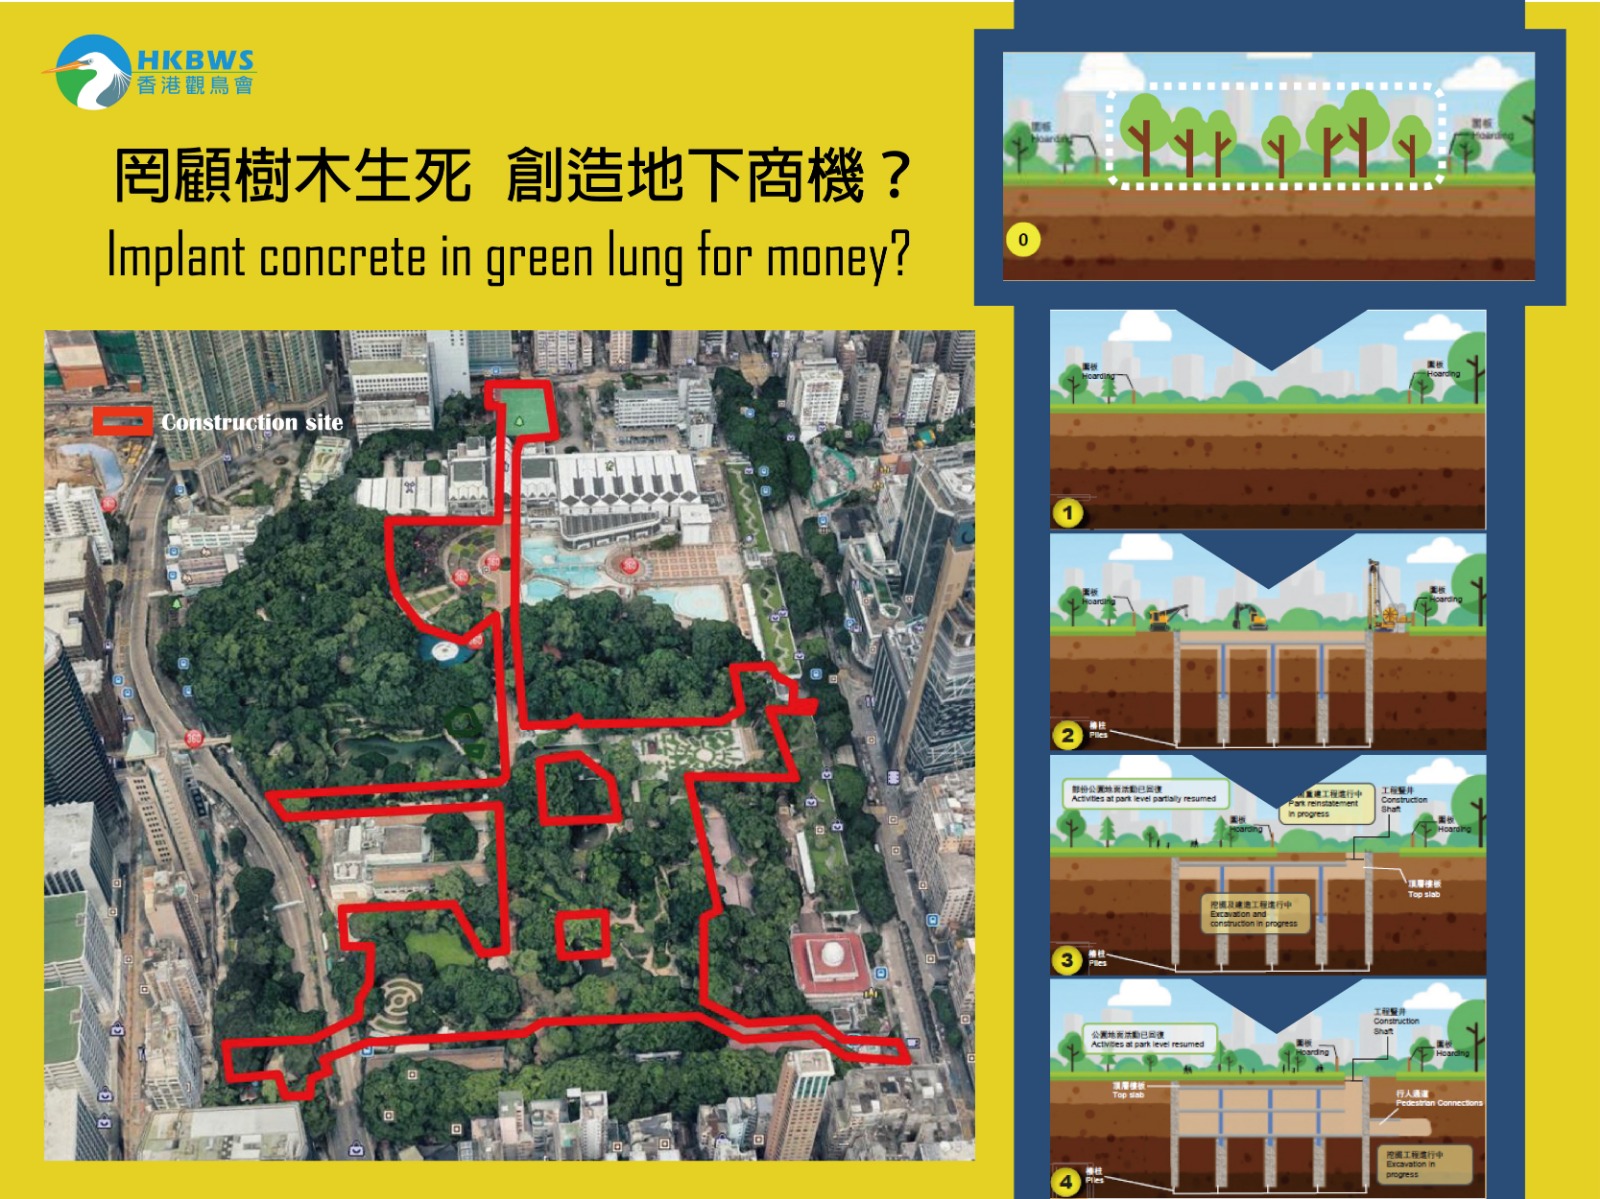  Underground Space Development at Kowloon Park - Implant concrete in green lung for money?